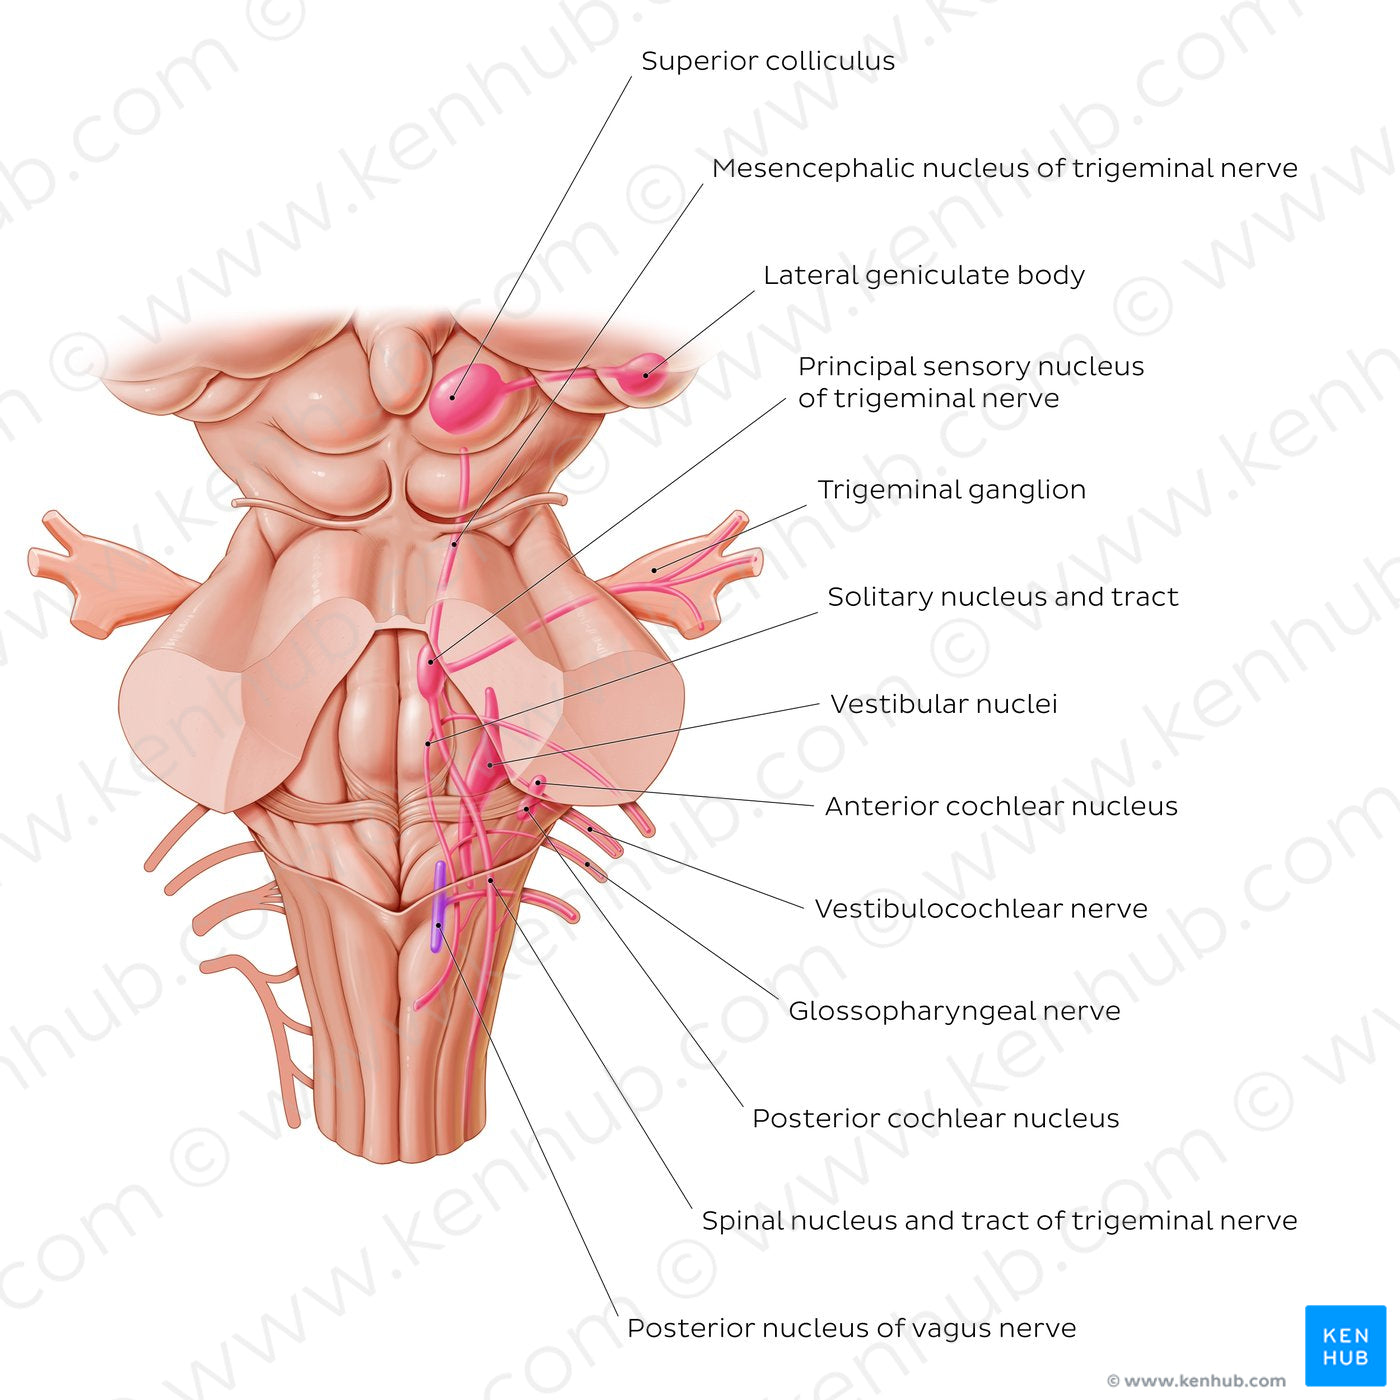 Cranial nerve nuclei - posterior view (afferent) (English)